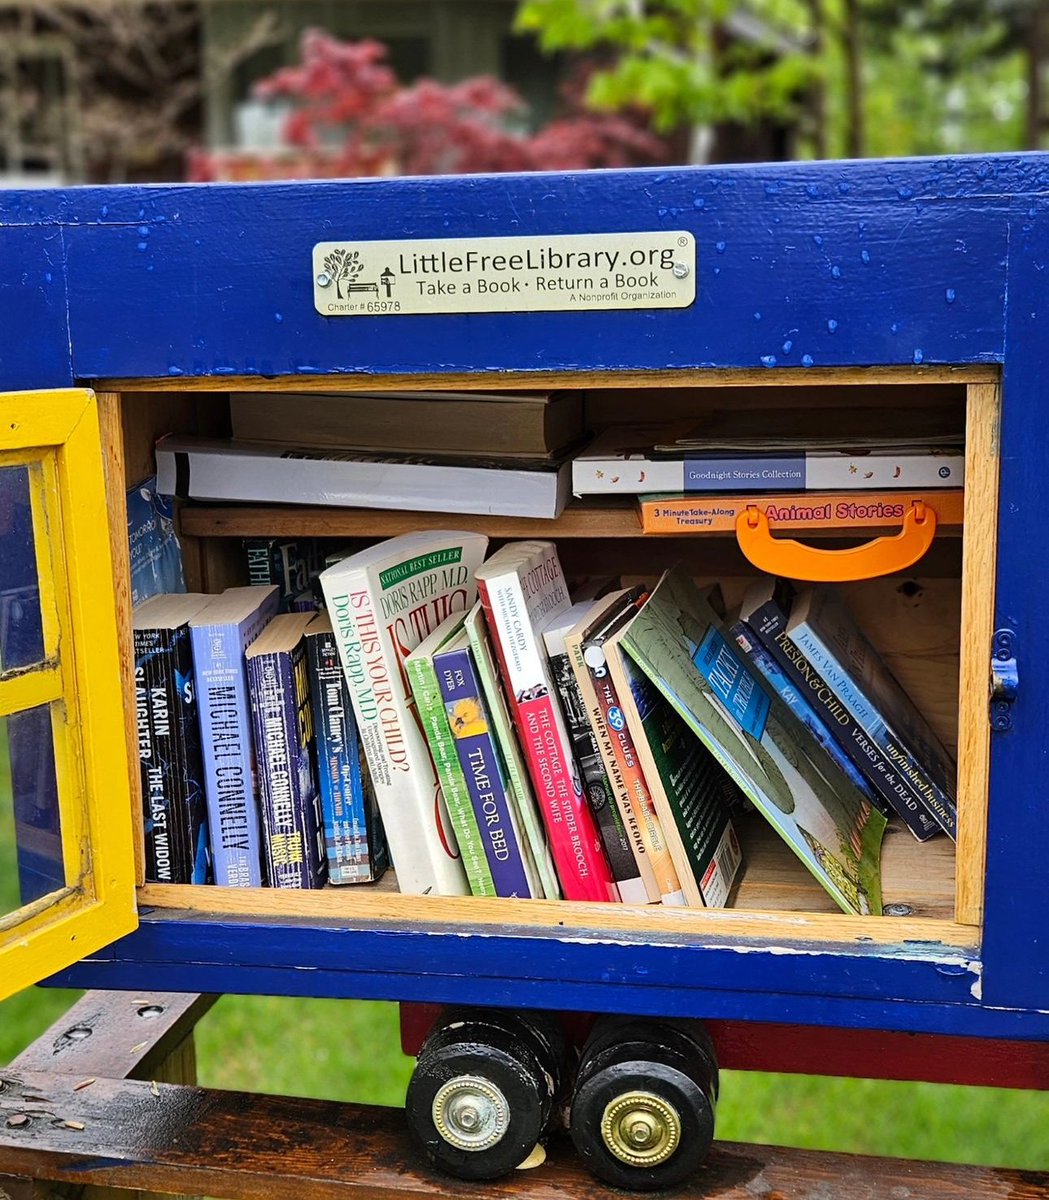 The Library of the Day is Little Free Library #65978 in Windsor, Ontario! Beep beep! Cruising for books 🚚📚 Find a Little Free Library near you by downloading our free mobile app: lflib.org/app